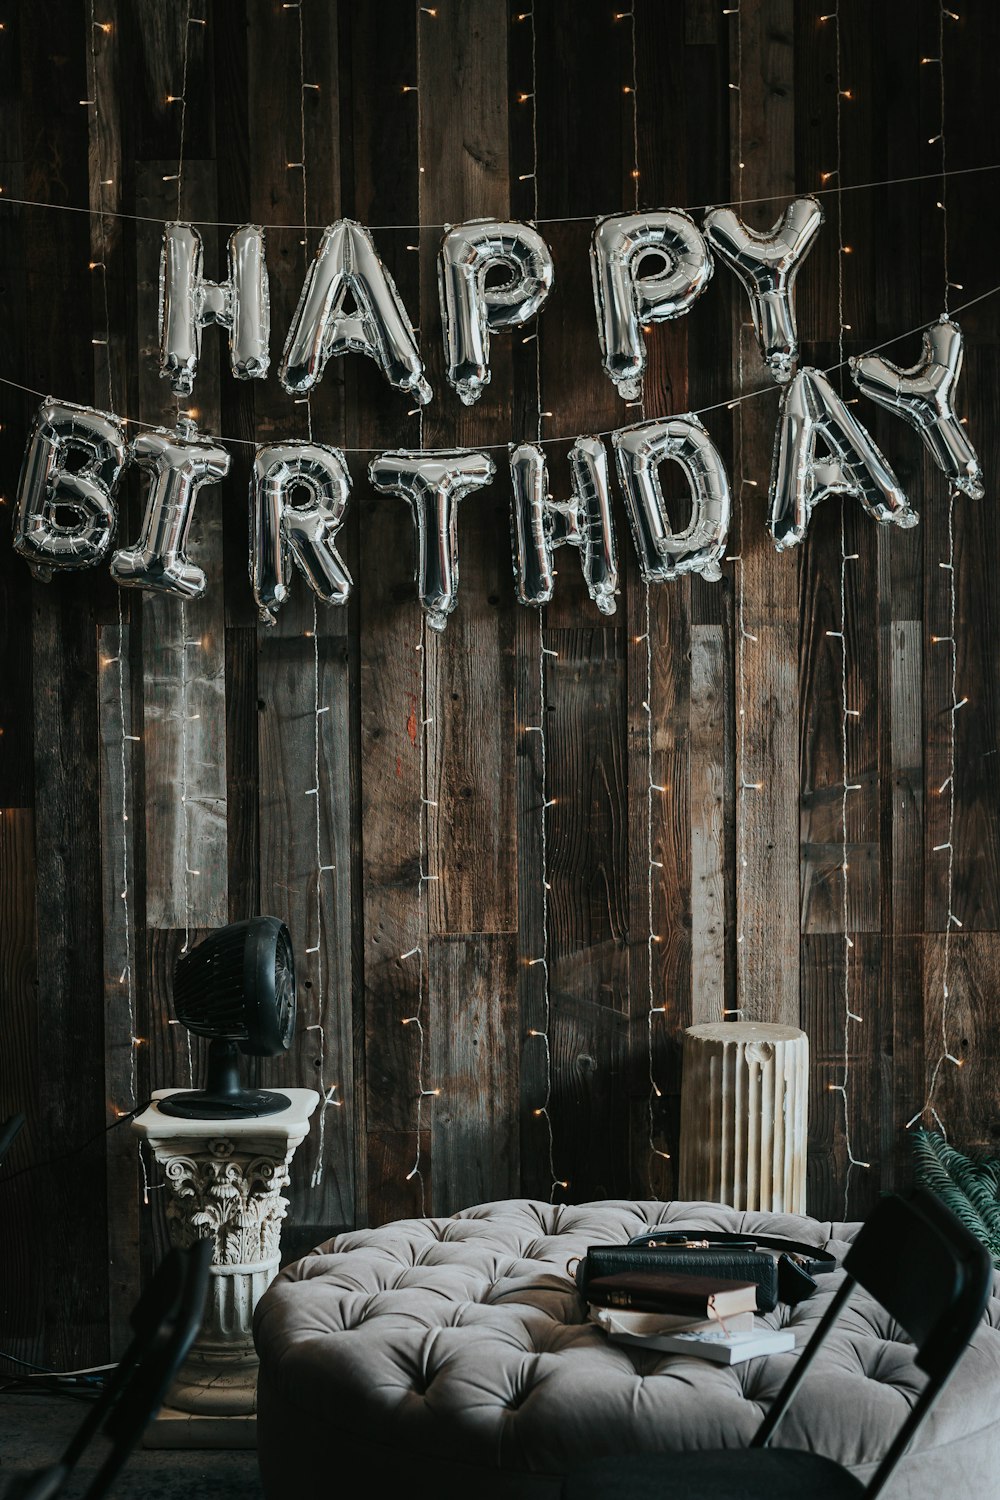 Birthday Decoration Pictures | Download Free Images on Unsplash